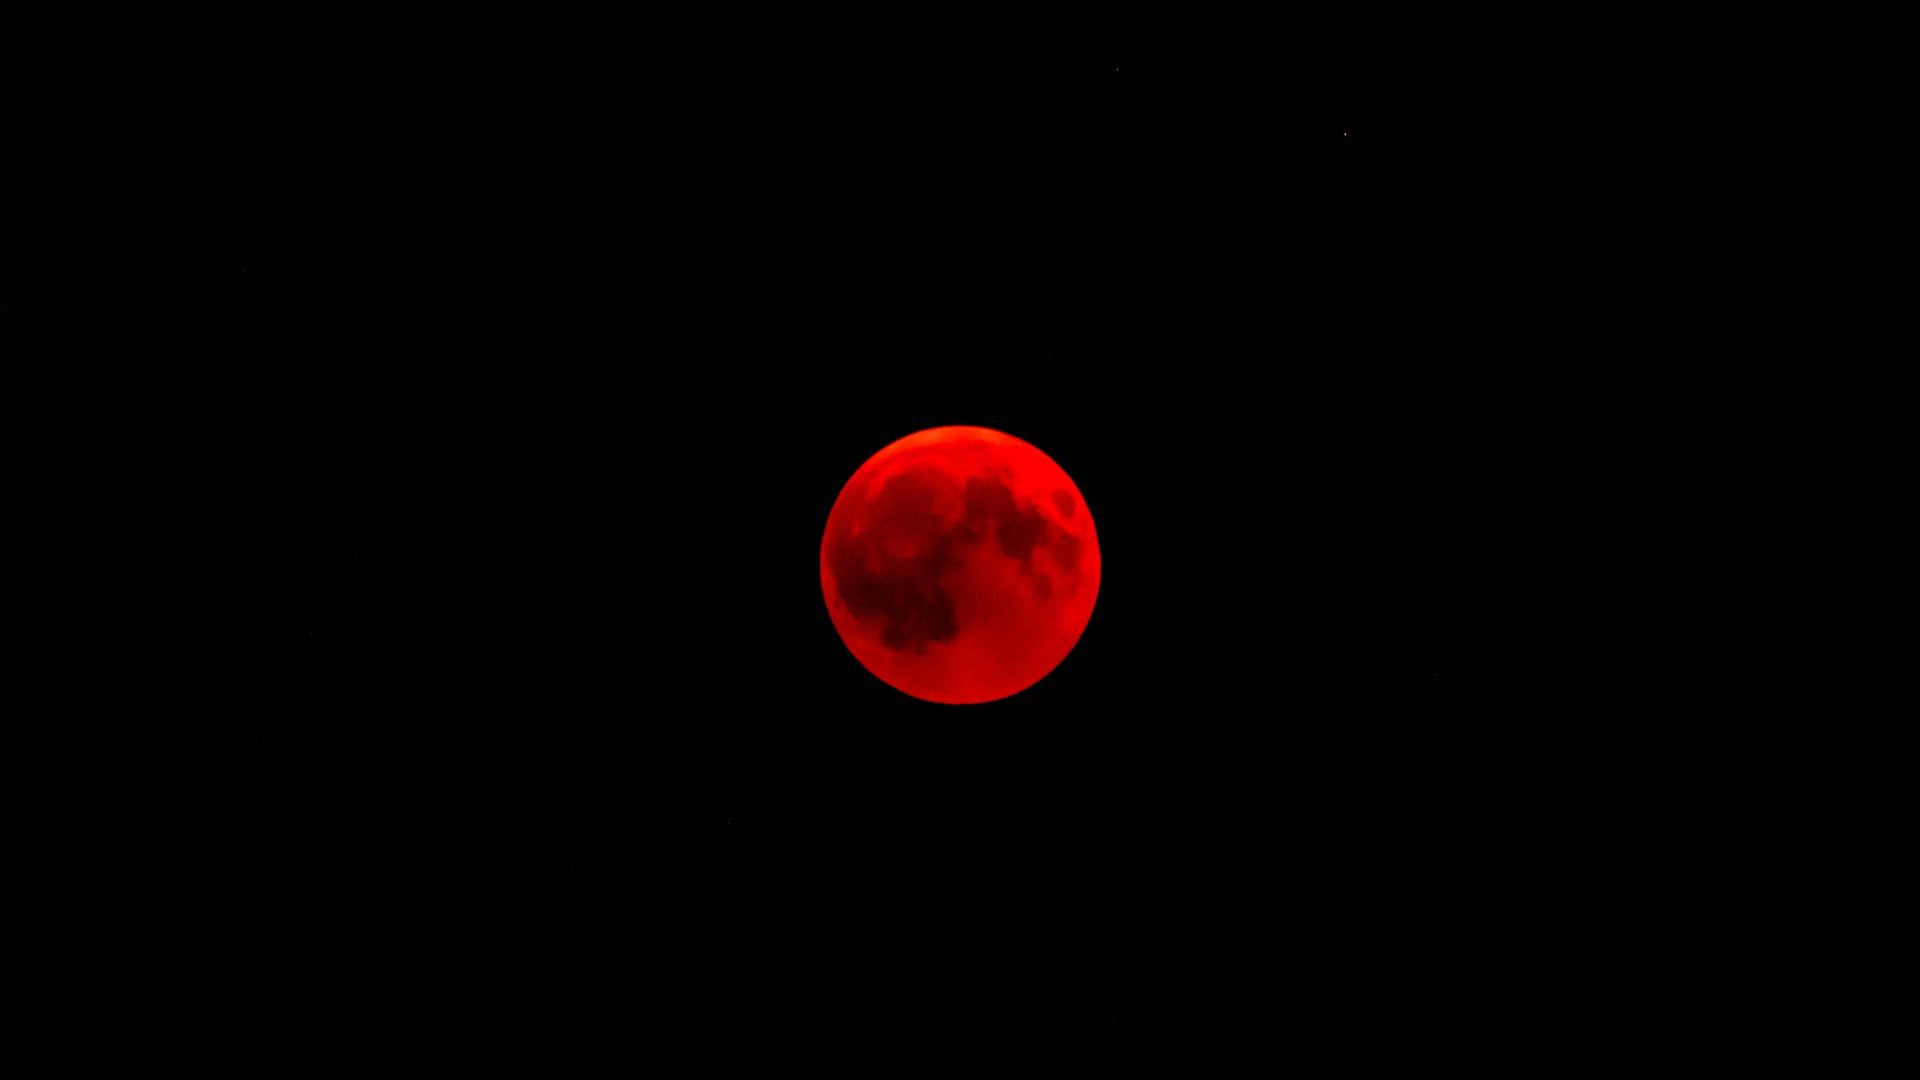 Red Full Moon with Black Background Wallpaper